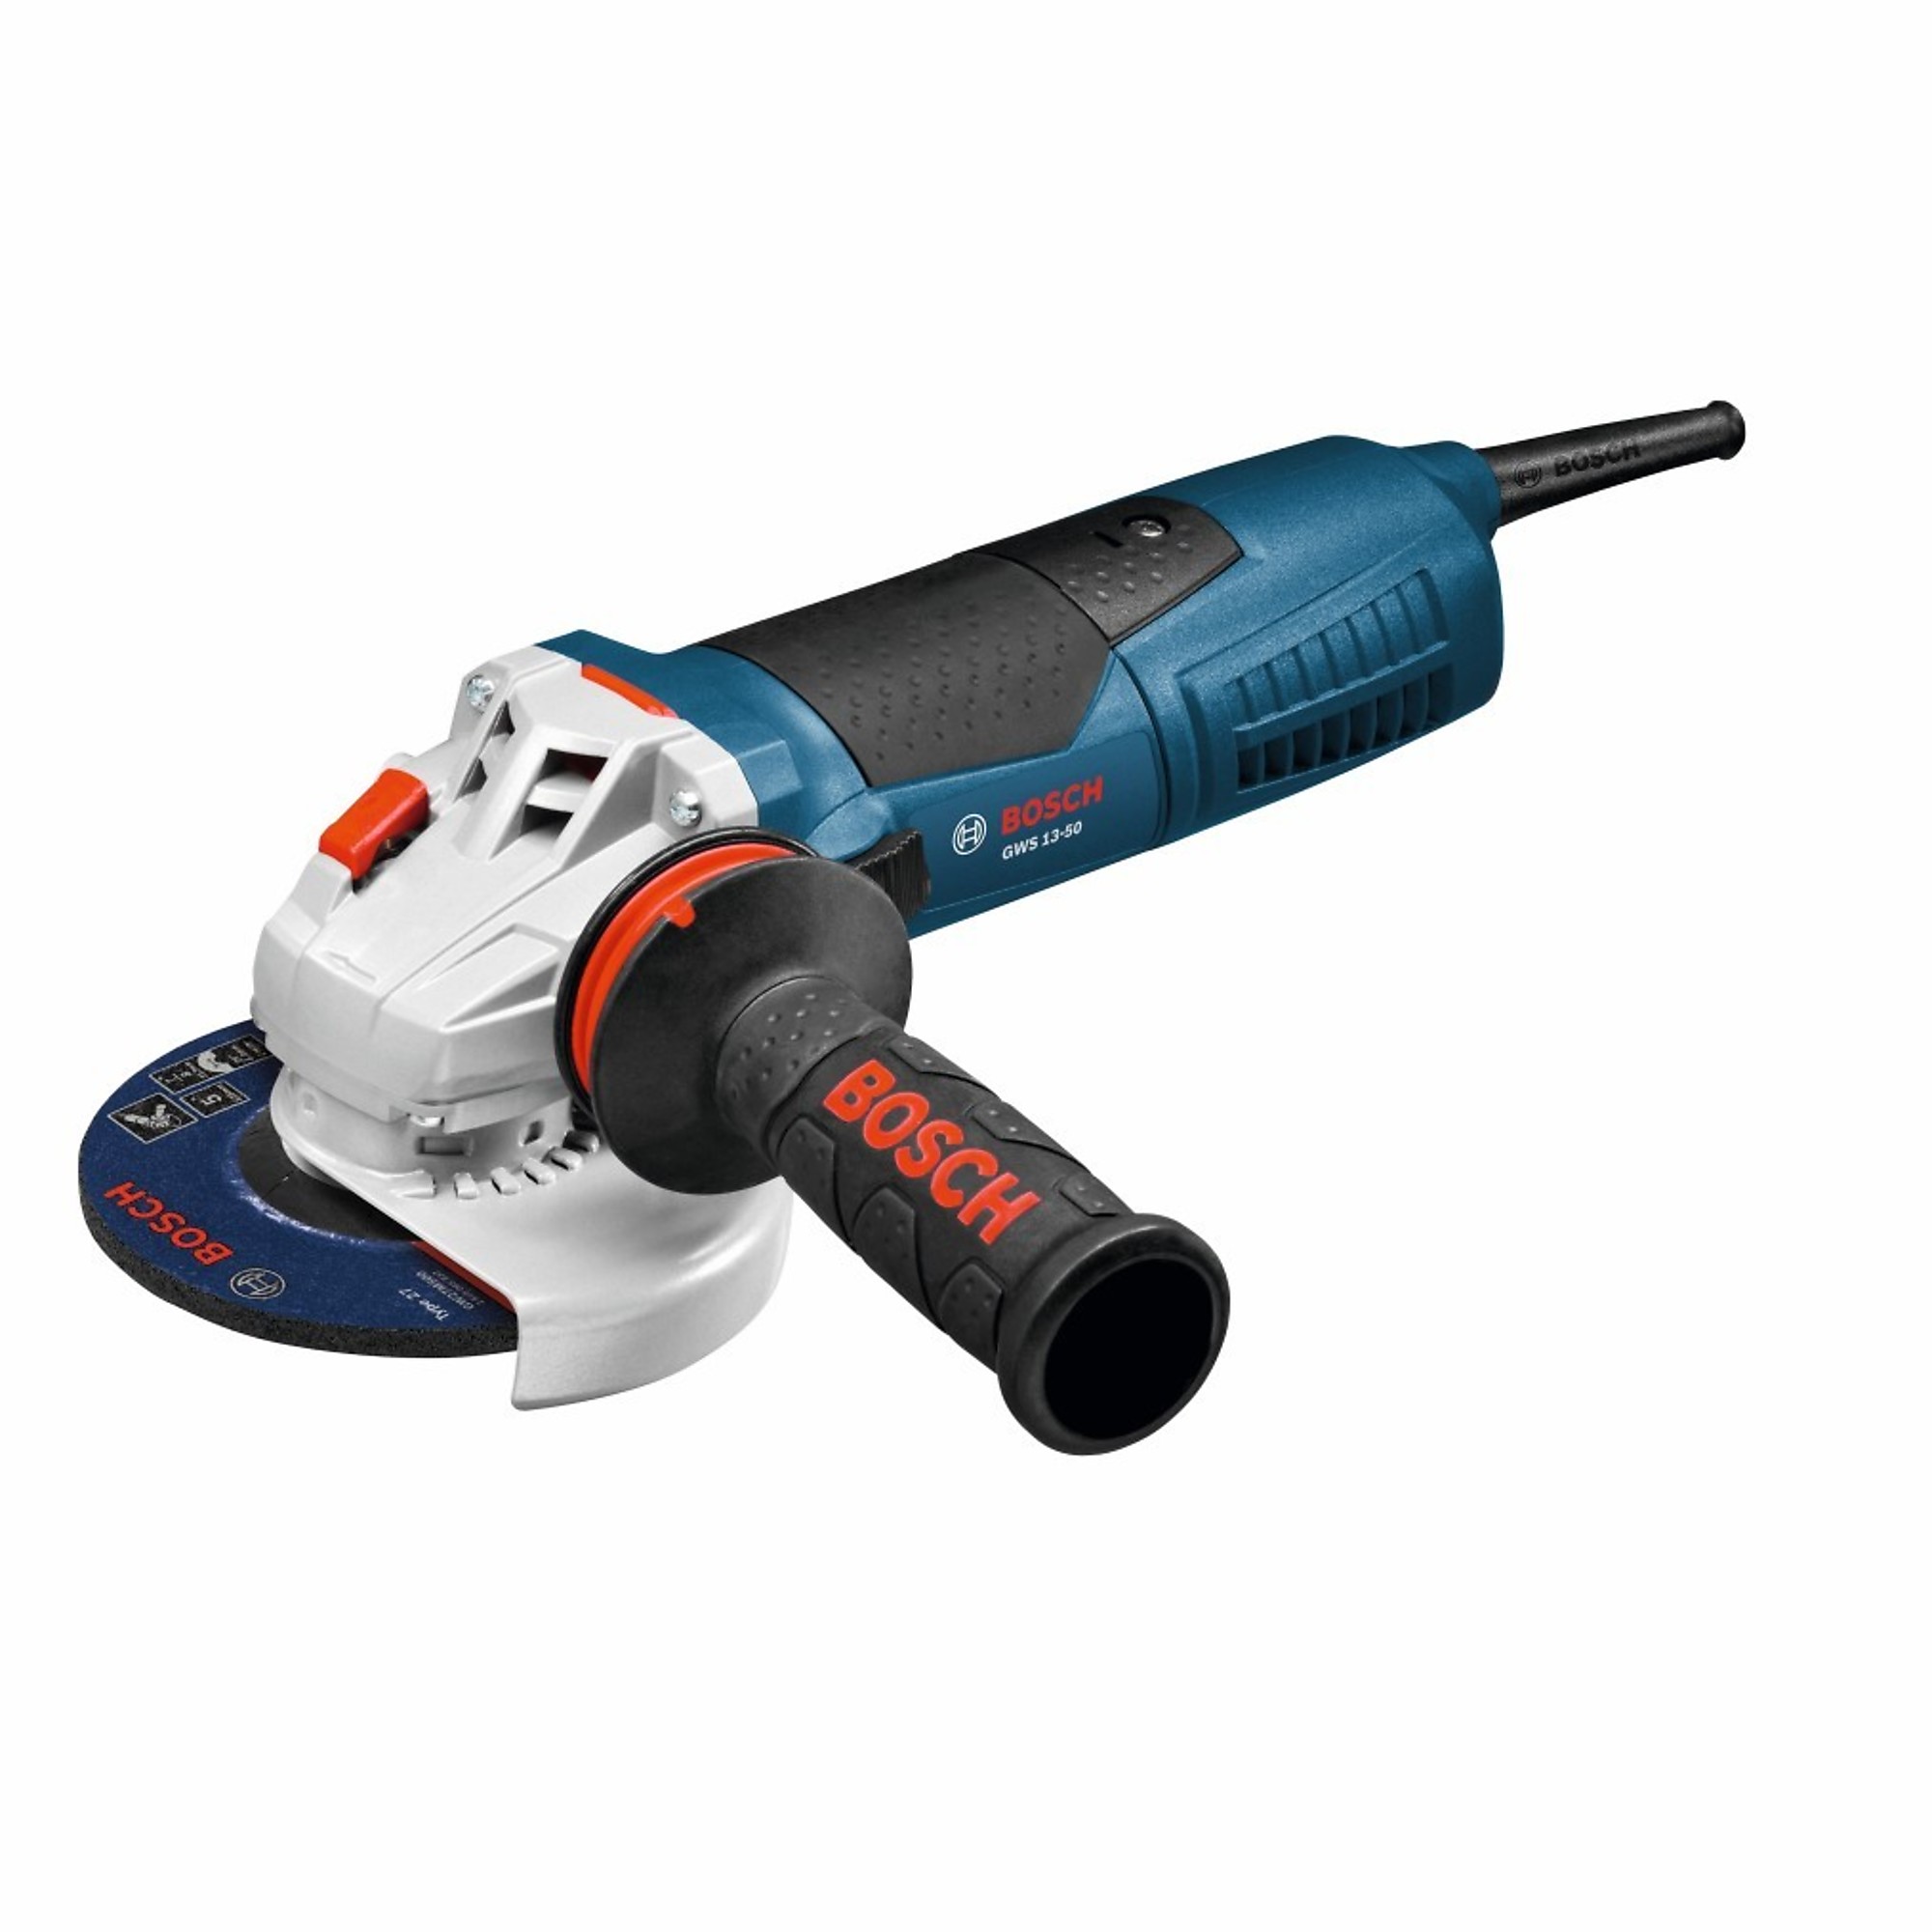 Bosch, 5Inch Angle Grinder 13 Amp, Wheel Diameter 5 in, Amps 13, Volts 120, Model GWS13-50